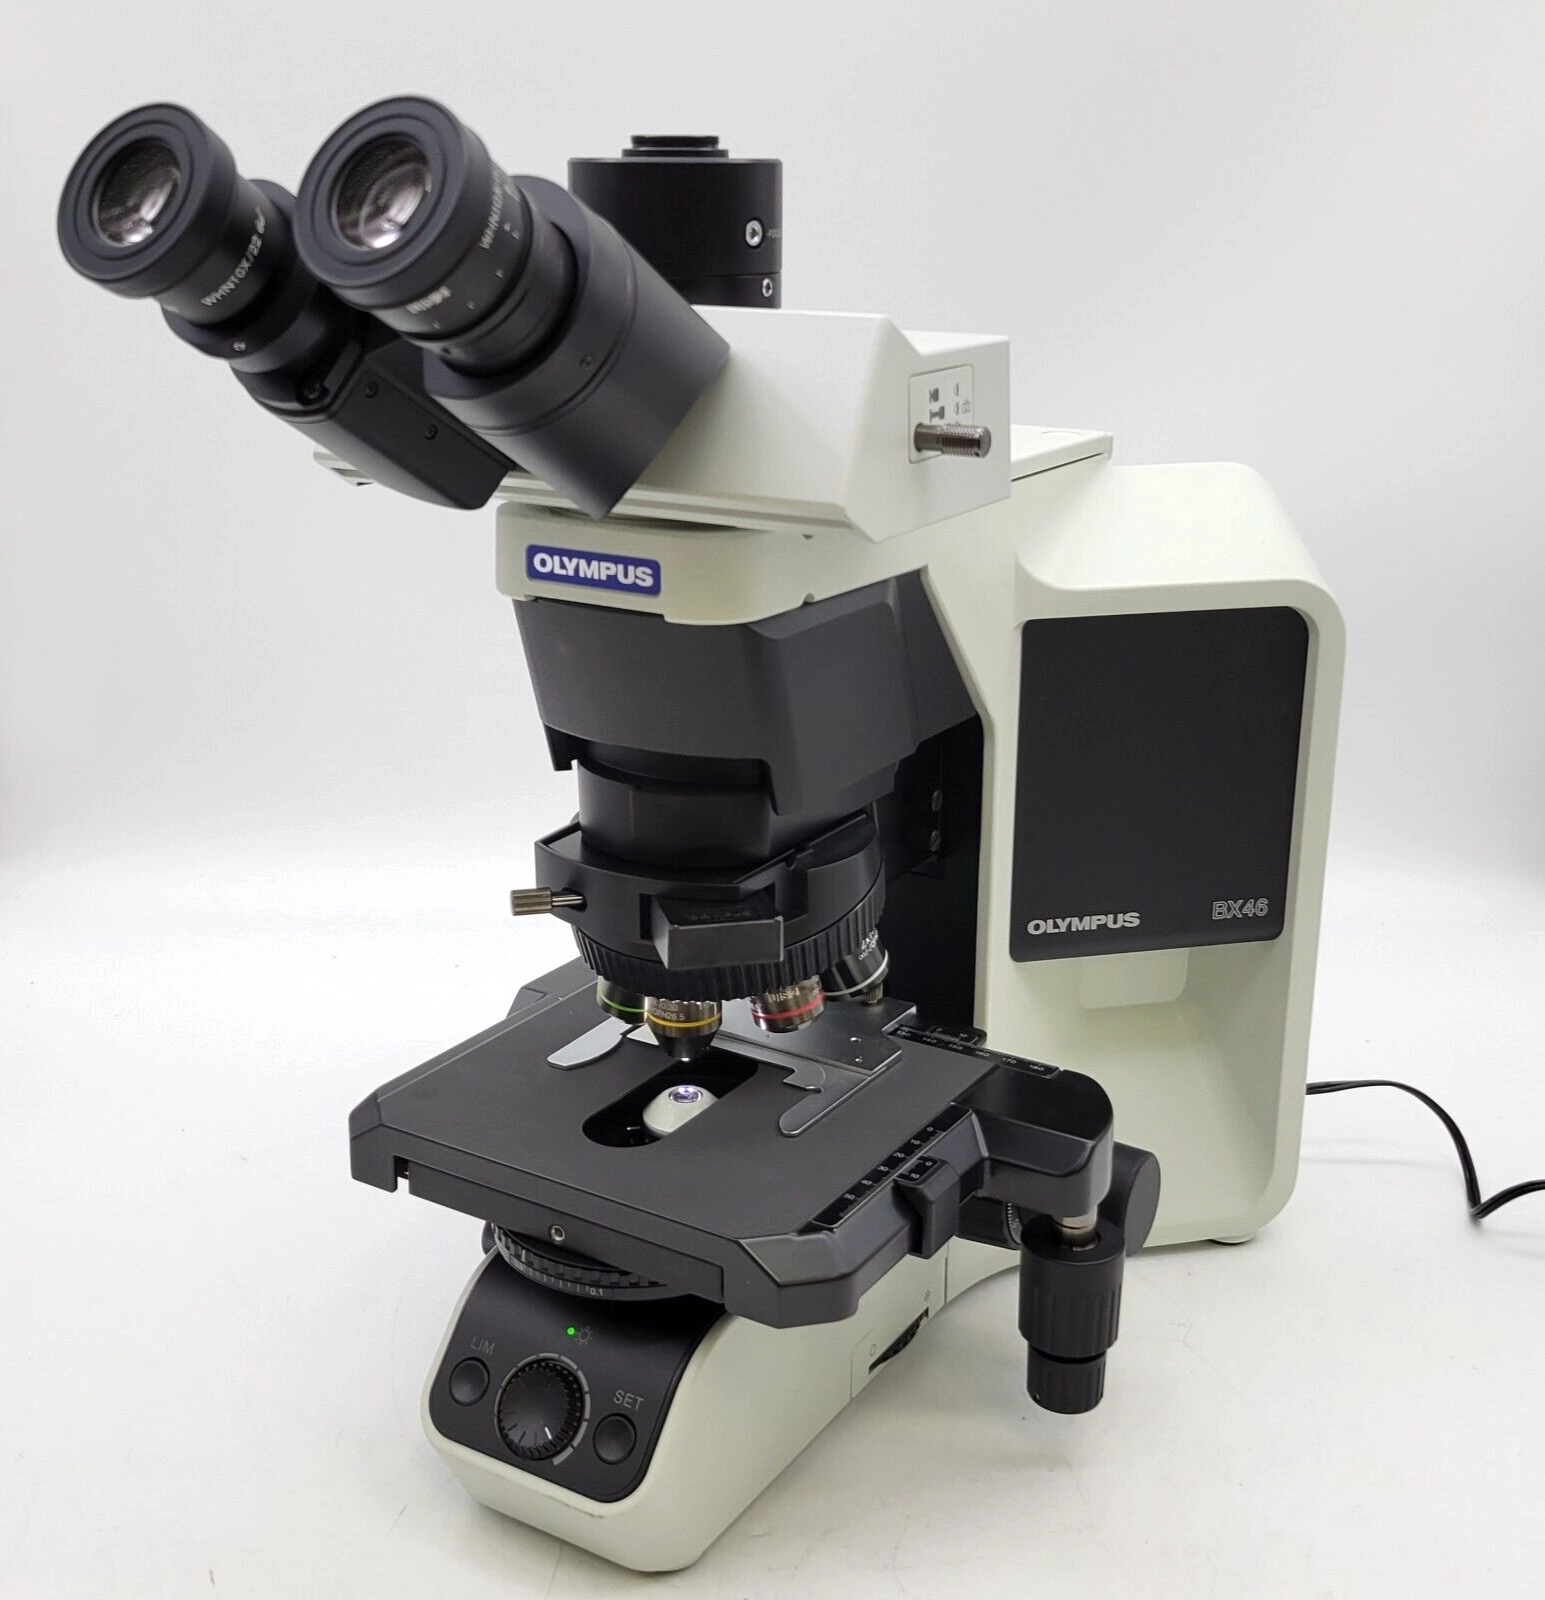 Olympus Microscope BX46 LED with Apo 2x, Fluorite Objectives and Trinocular Head